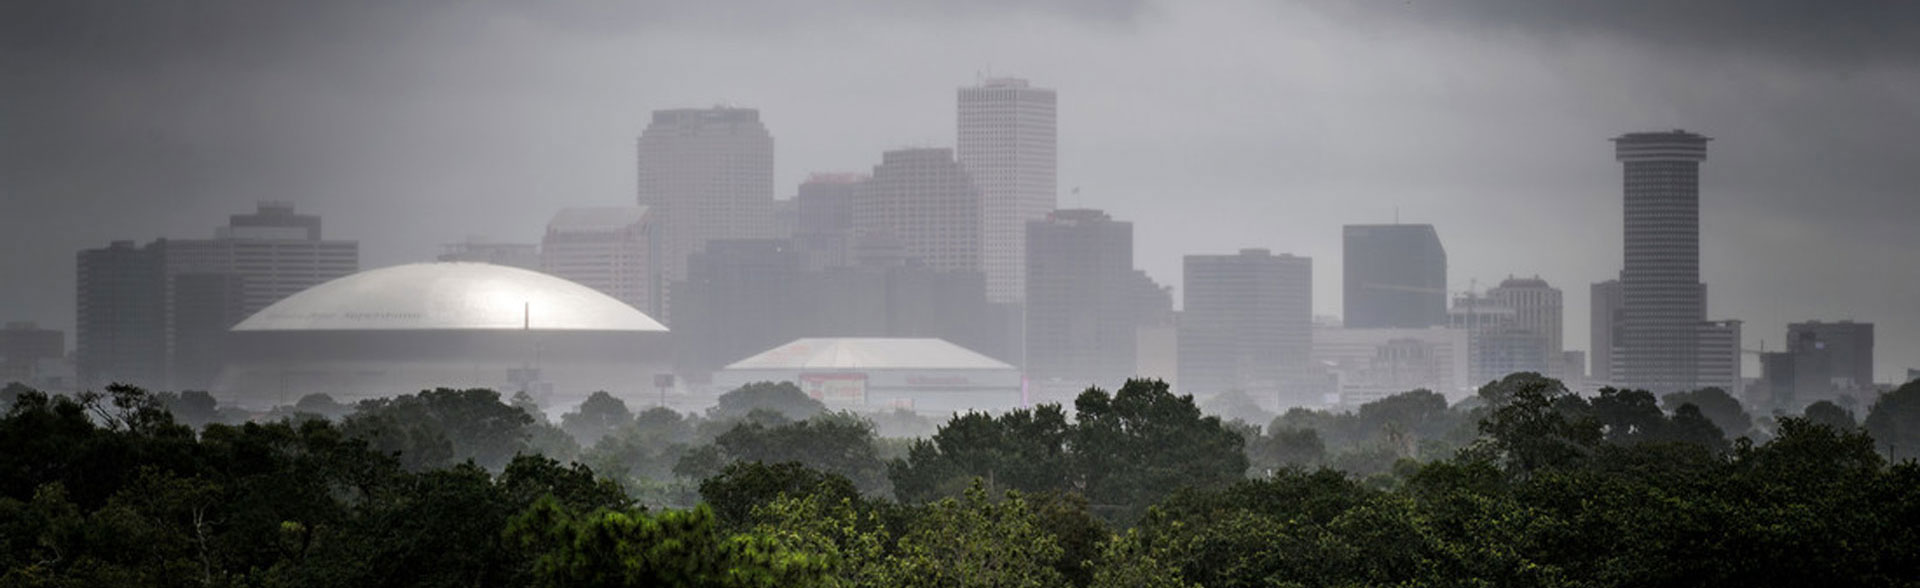 A dark and rainy New Orleans skyline during thunderstorm